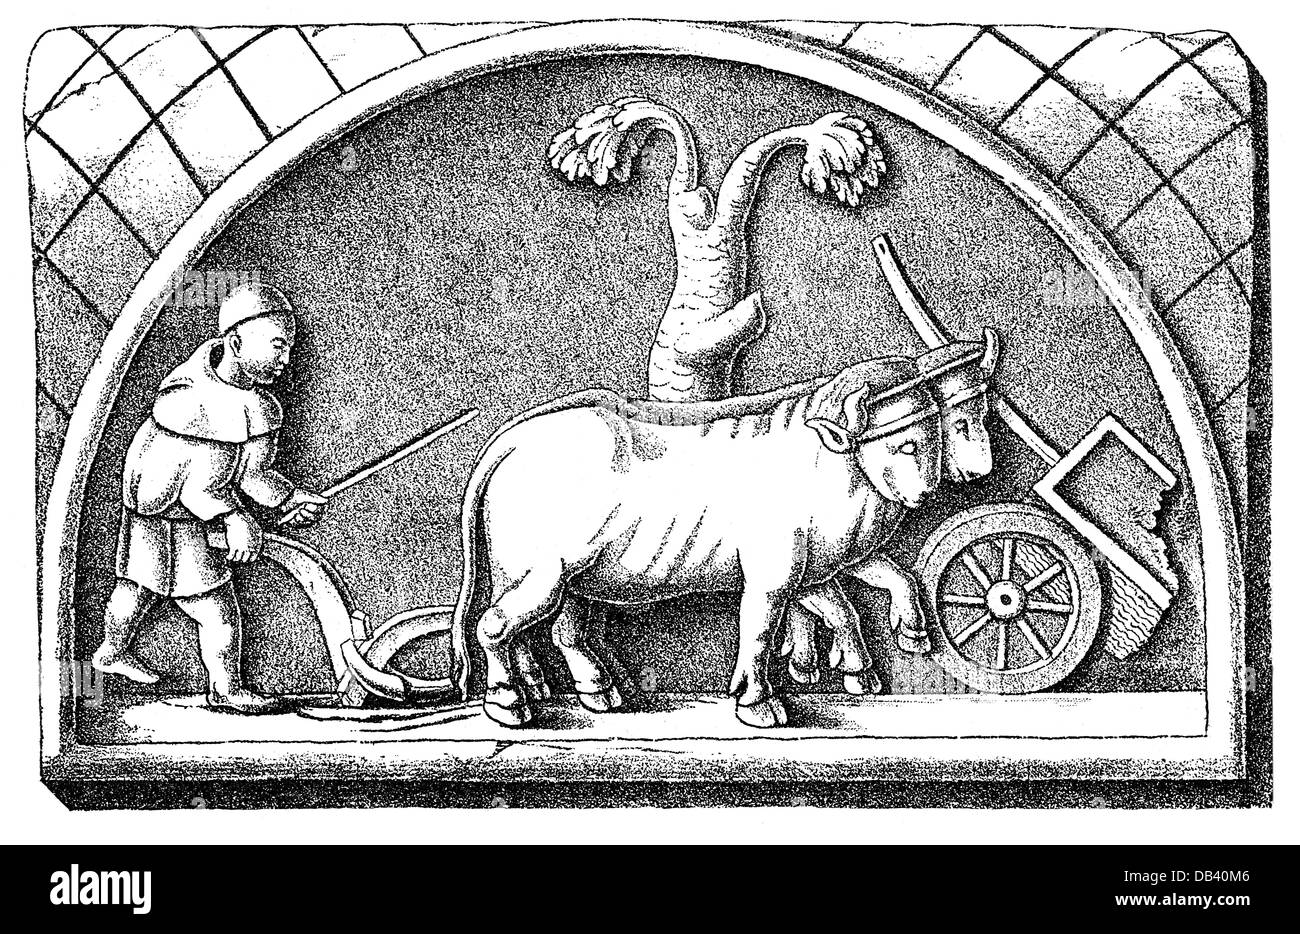 agriculture, agricultural work, plowing, Roman farmer with a wooden plough, relief, Arel (Arlon), Belgium, circa 200 AD, wood engraving, 19th century, ancient world, ancient times, Roman Empire, Romans, ploughs, plows, plough, plow, ploughing, plowing, working, people, man, men, animals, animal, ox, team, span of oxen, team of oxen, field, fields, cart, carts, late 2nd century, early 3rd century, agriculture, farming, agricultural work, farm labour, farm labor, farmer, farmers, historic, historical, ancient world, male, Additional-Rights-Clearences-Not Available Stock Photo